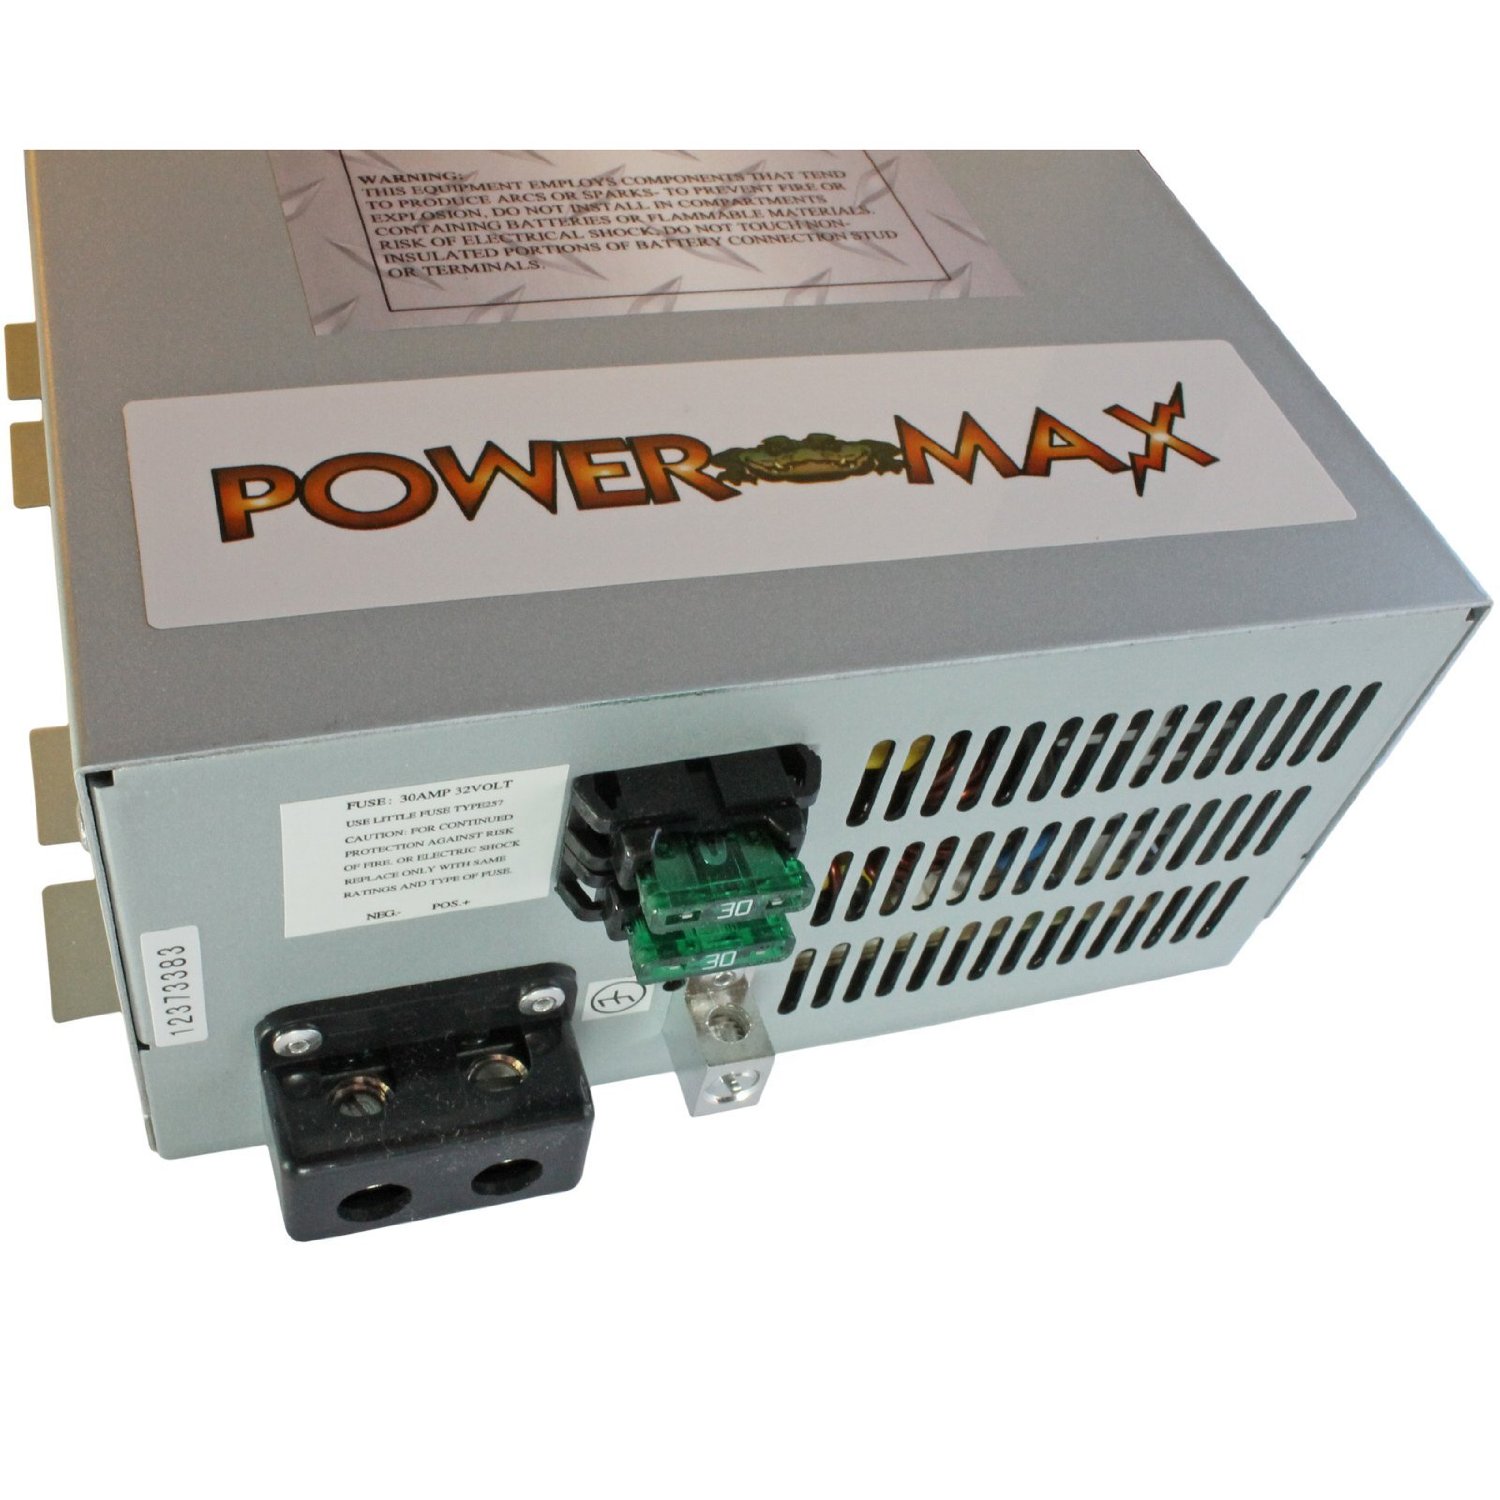 Powermax 110 Volt to 12 Volt Dv Power Supply Converter Charger for Rv Pm3-45 (45 Amp)